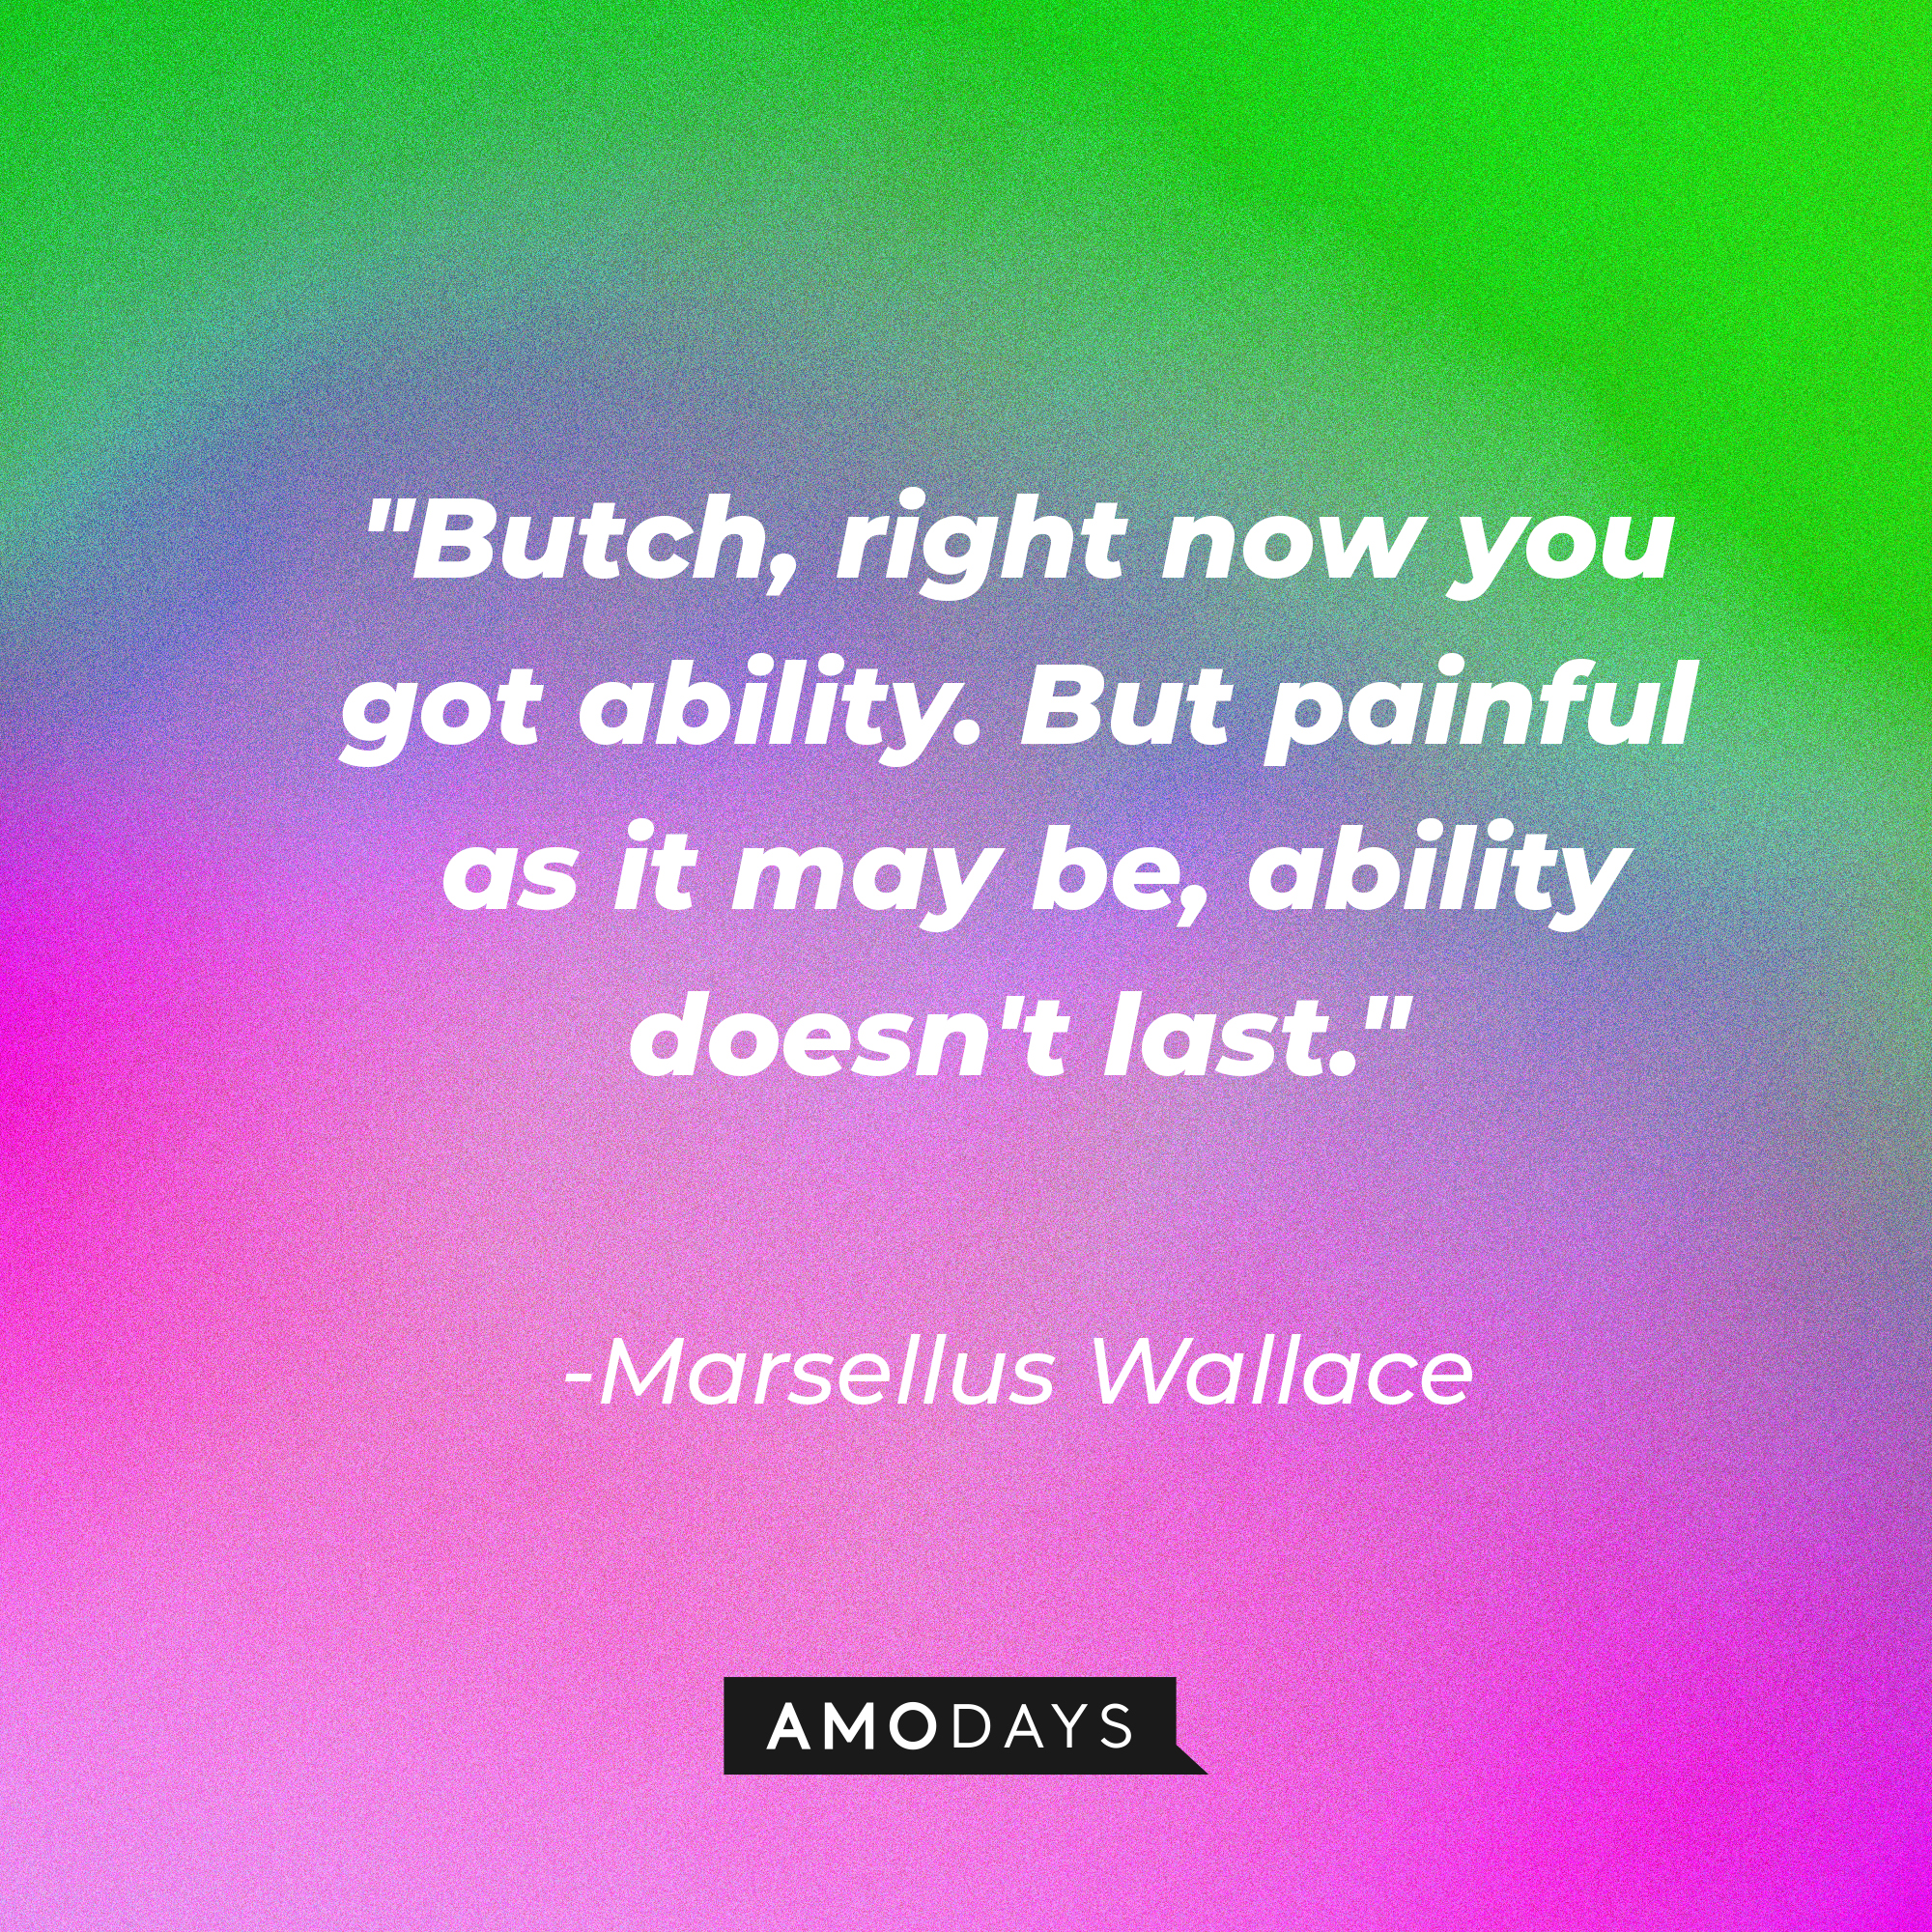 Marsellus Wallace's quote: "Butch, right now you got ability. But painful as it may be, ability doesn't last." | Source: AmoDays